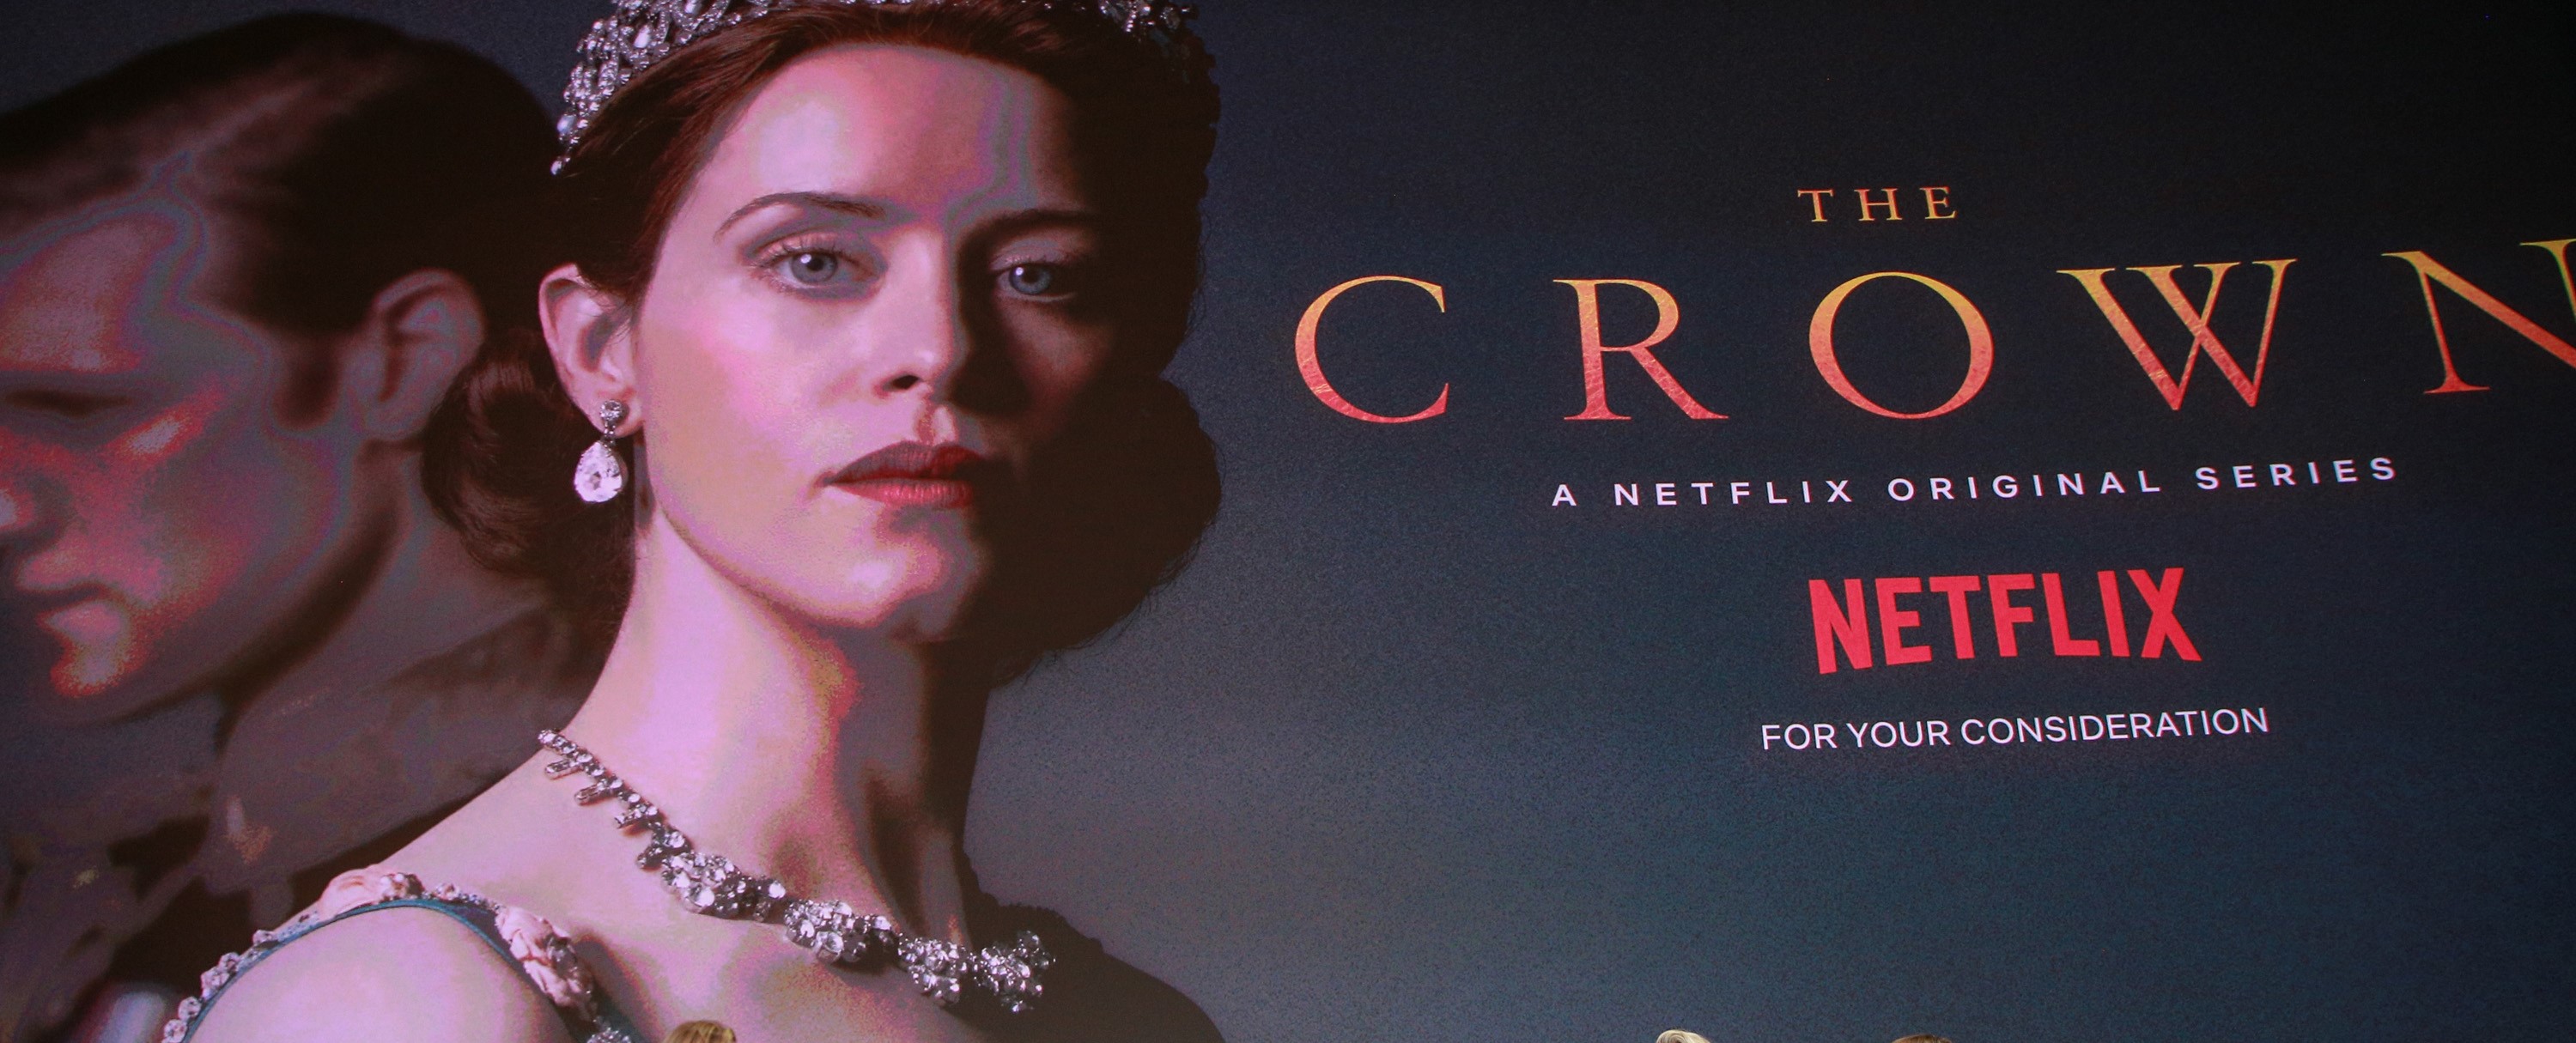 Event for Netflix's 'The Crown'